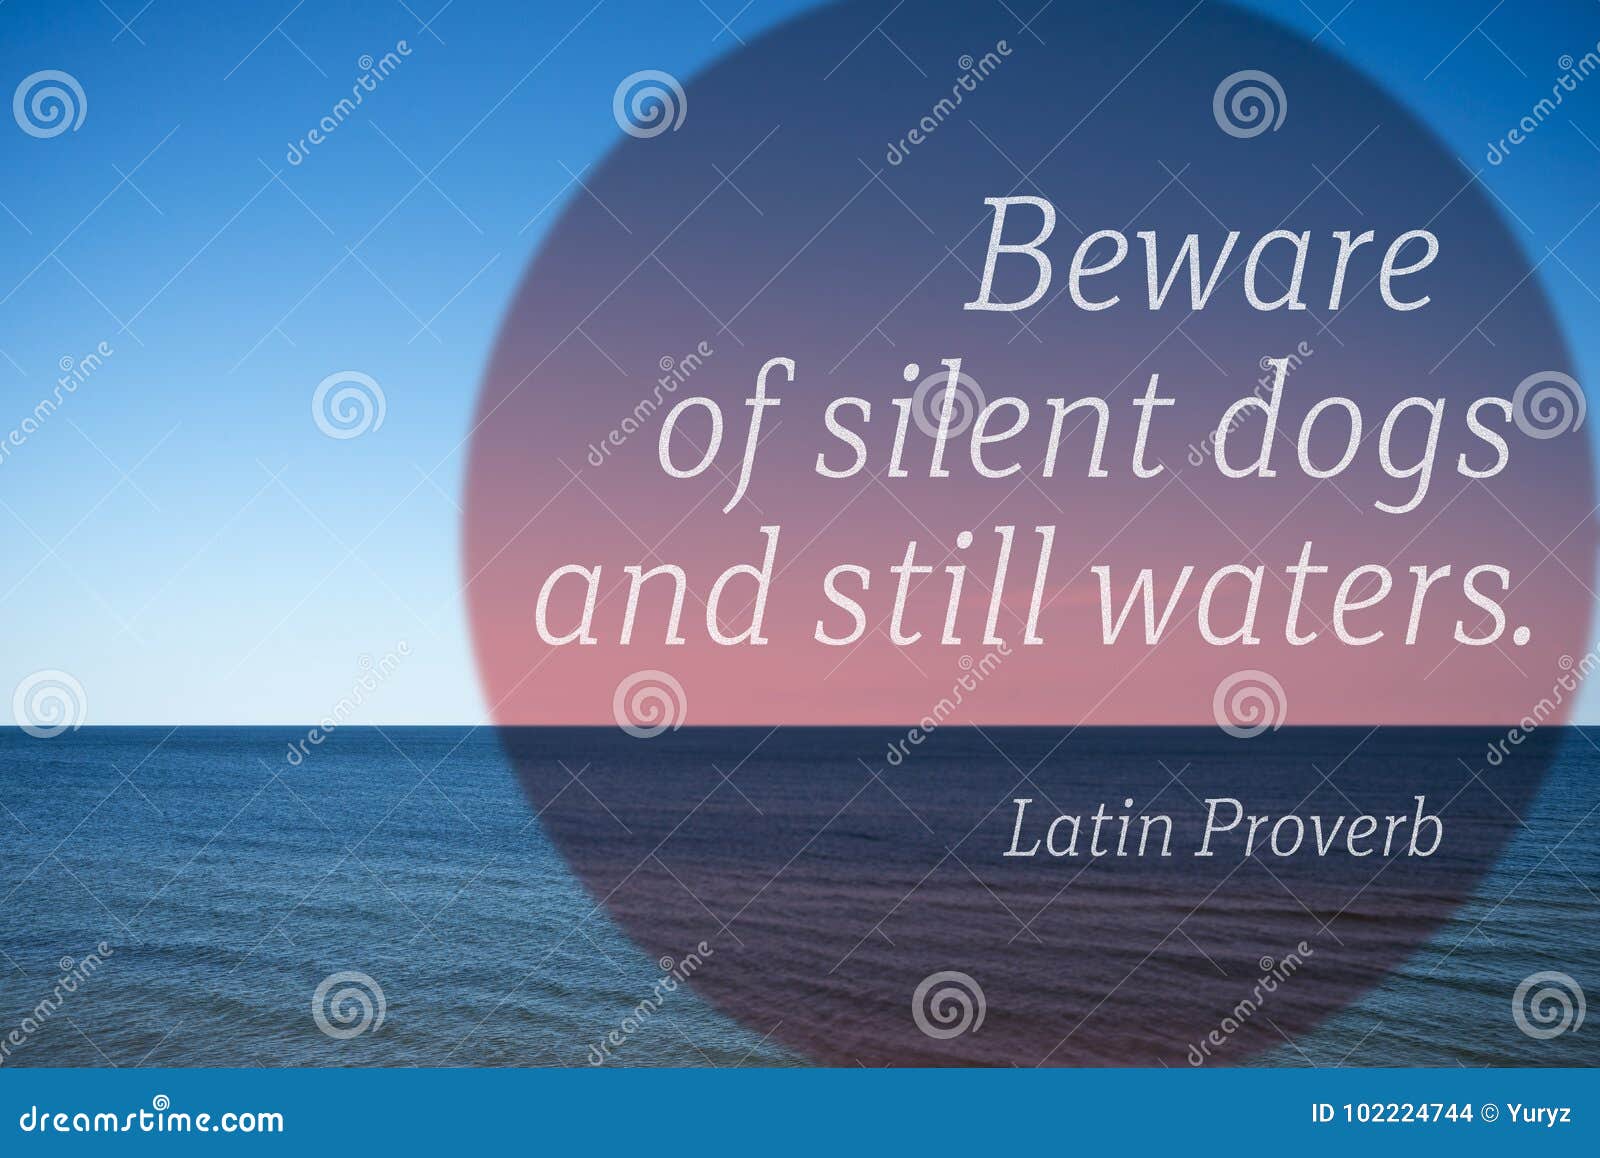 still waters proverb